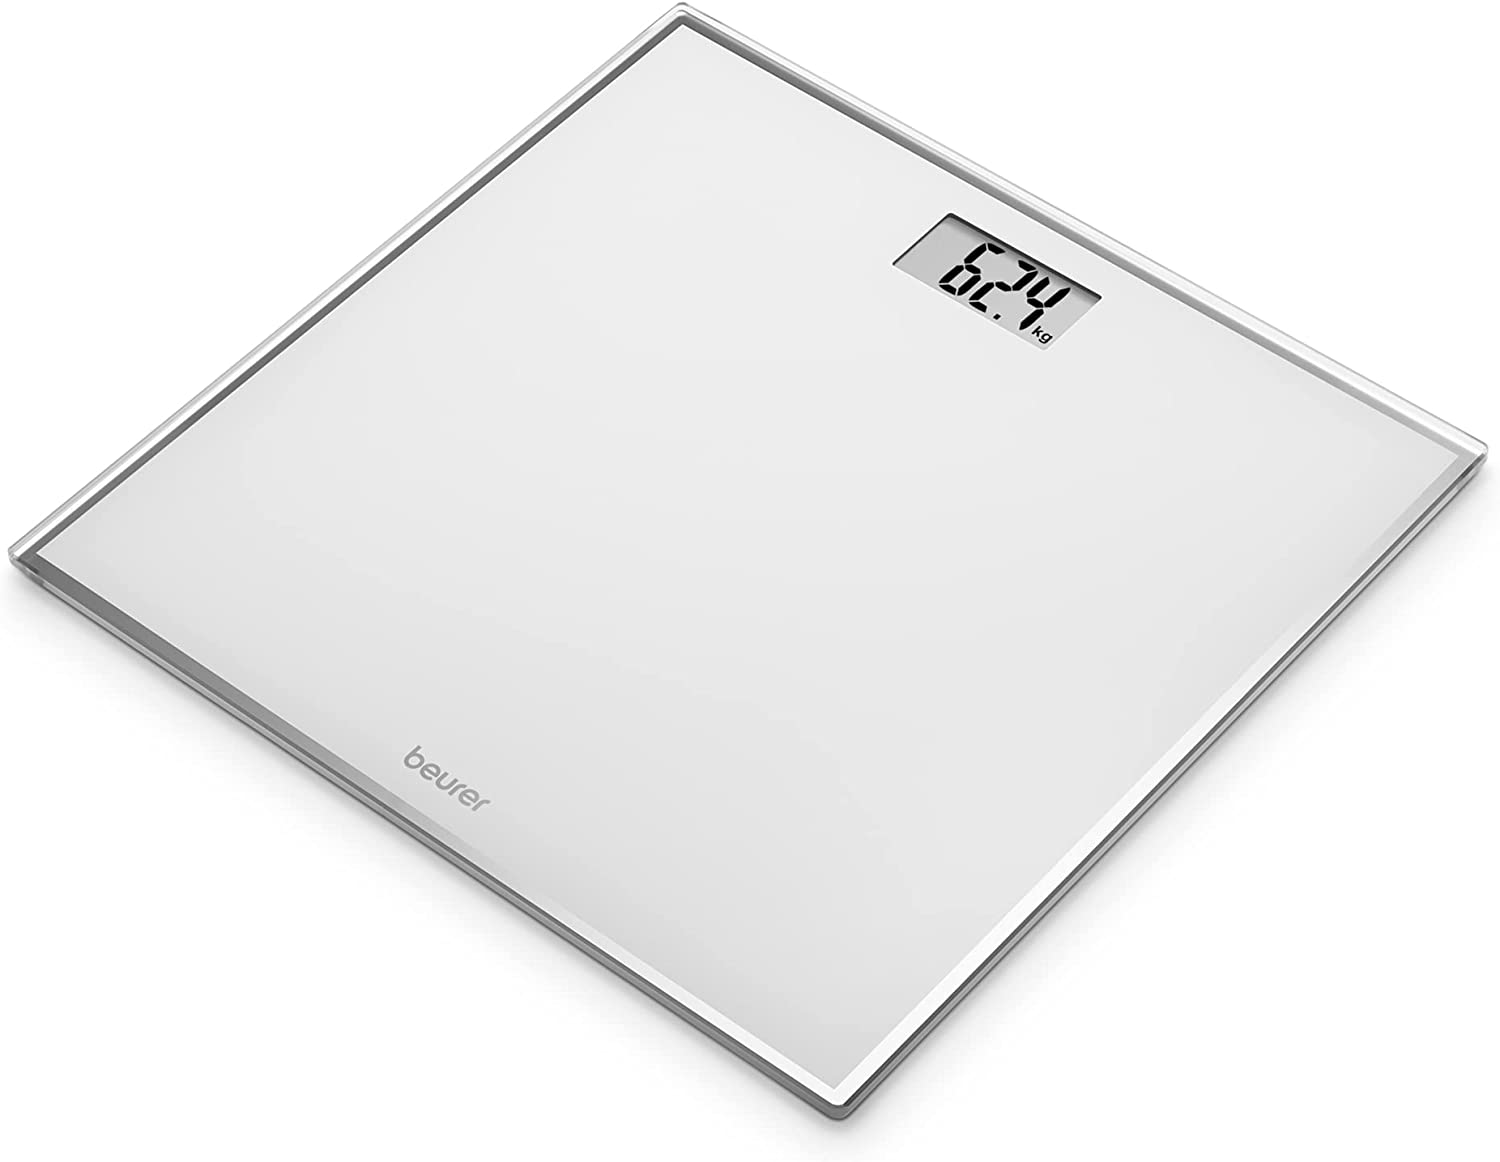 Beurer GS 120 Compact Glass Scales